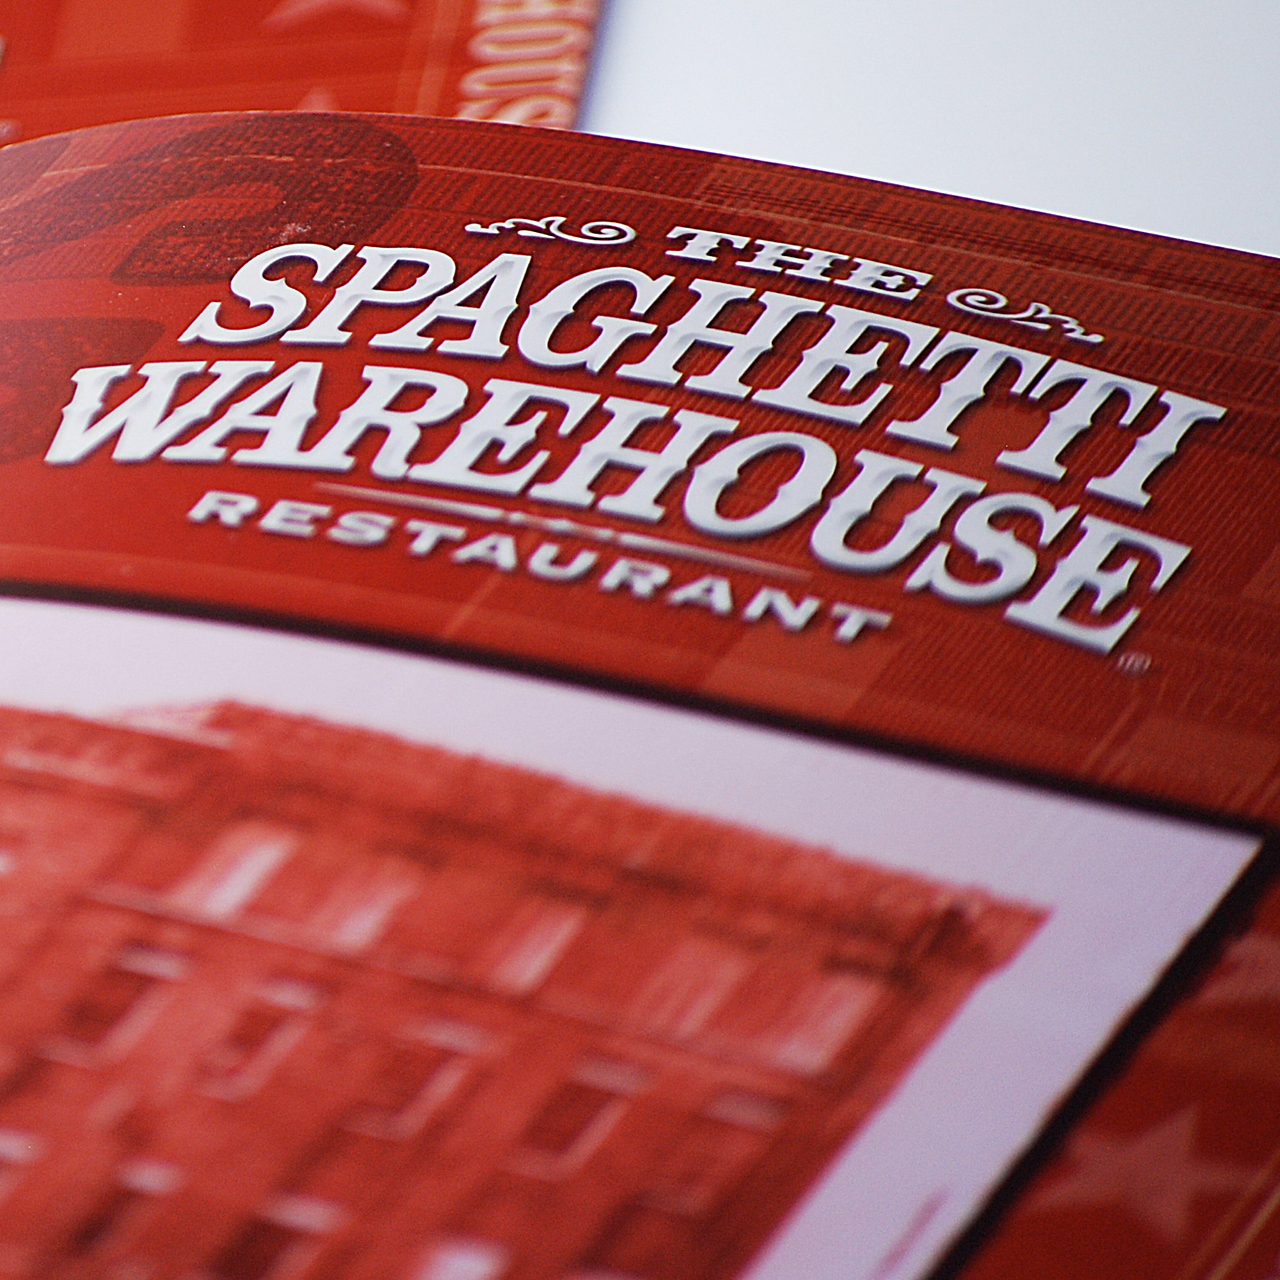 An image of the cover design for the Spaghetti Warehouse menu